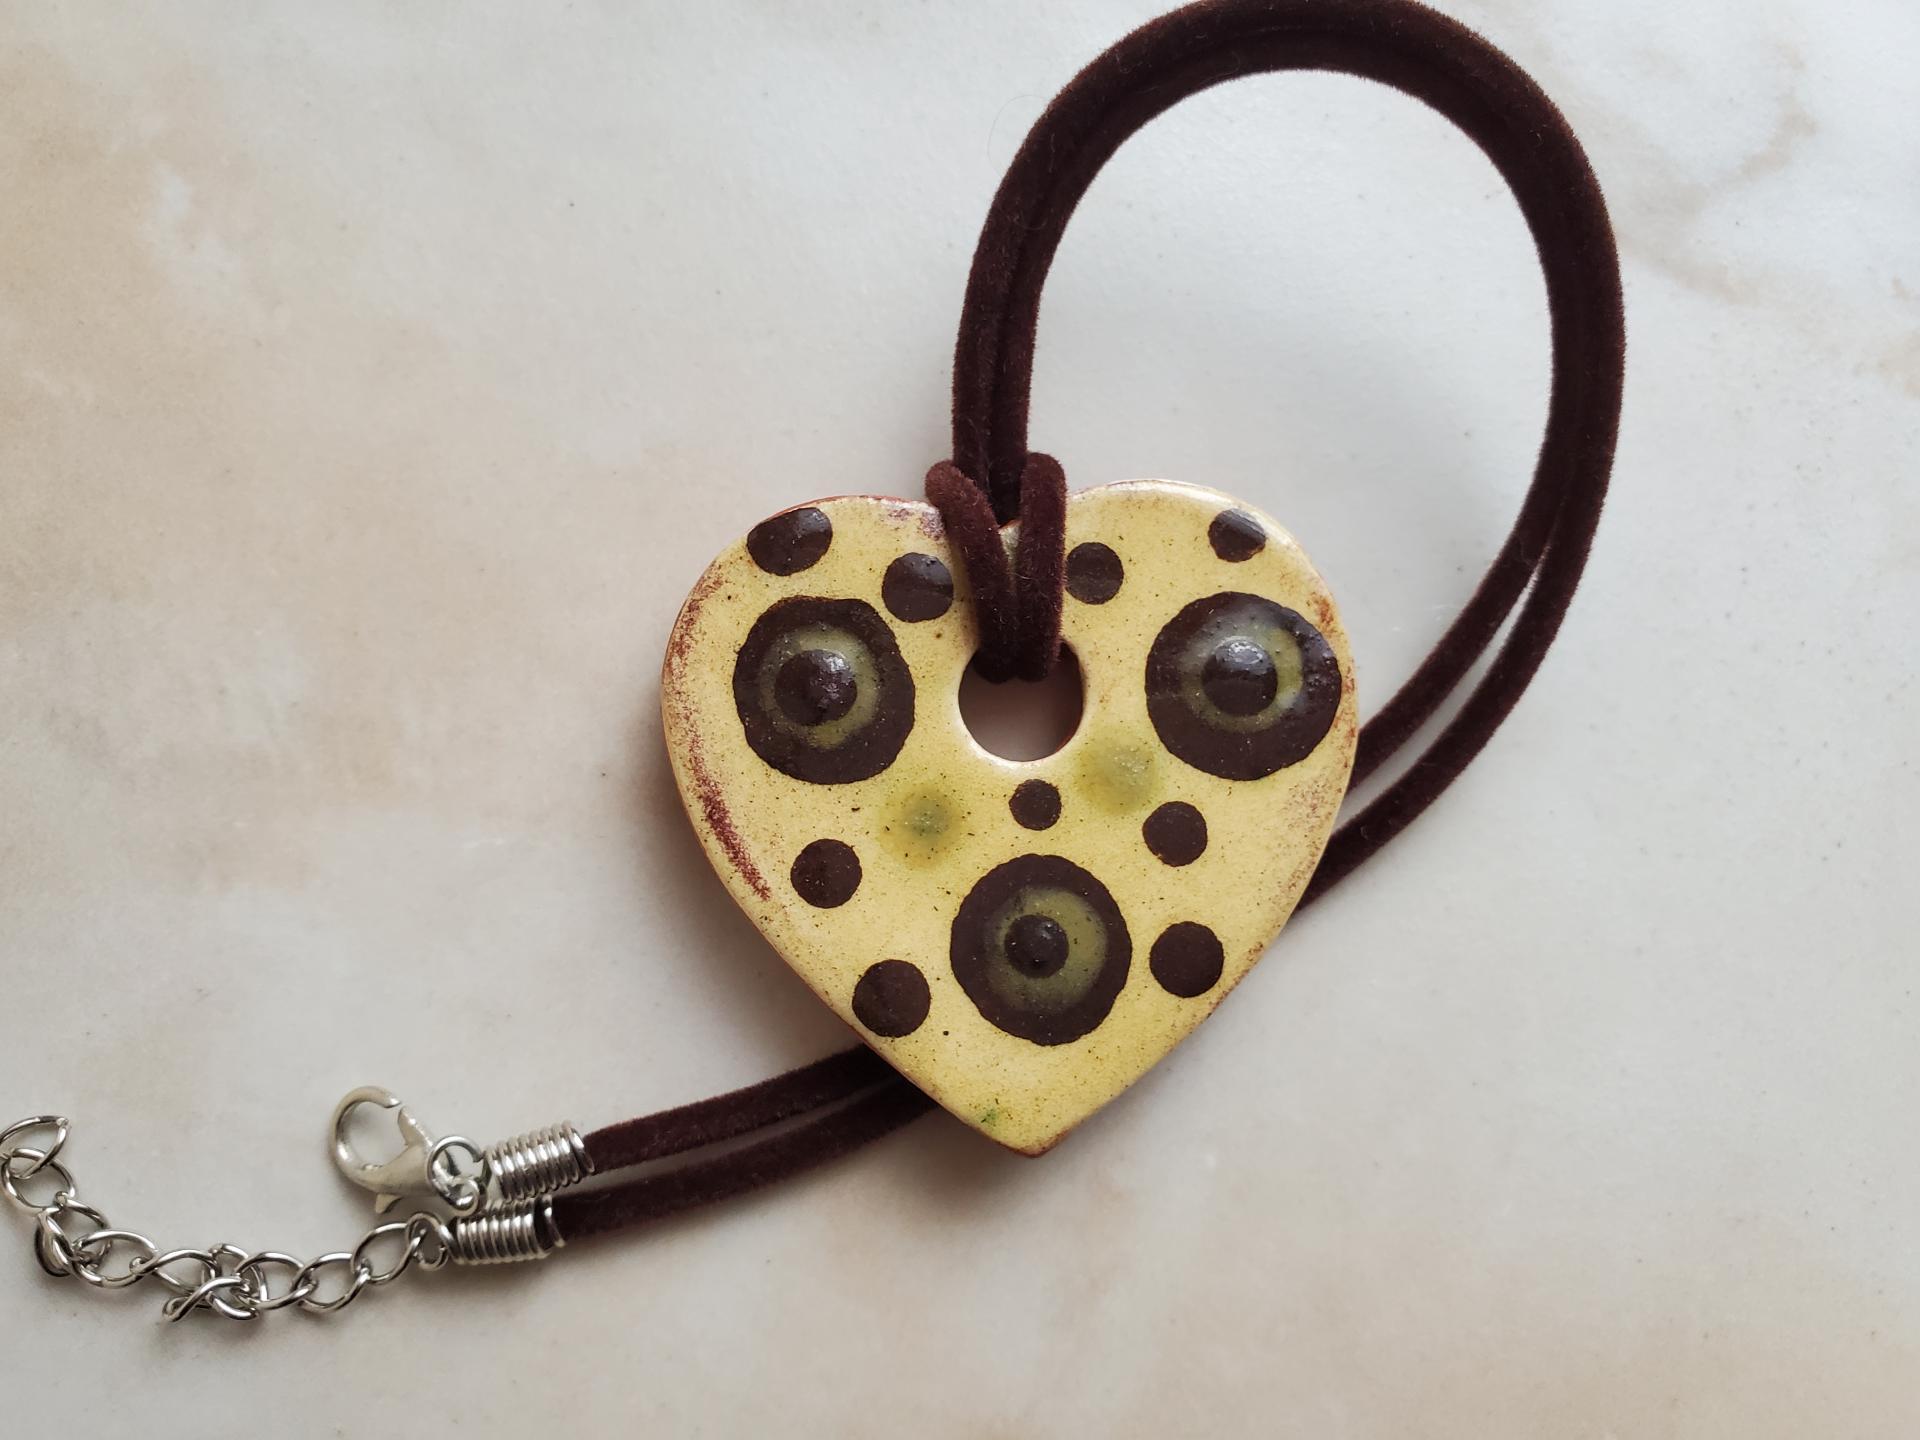 Redware Mini Heart Necklace with Green and Black Polka Dots